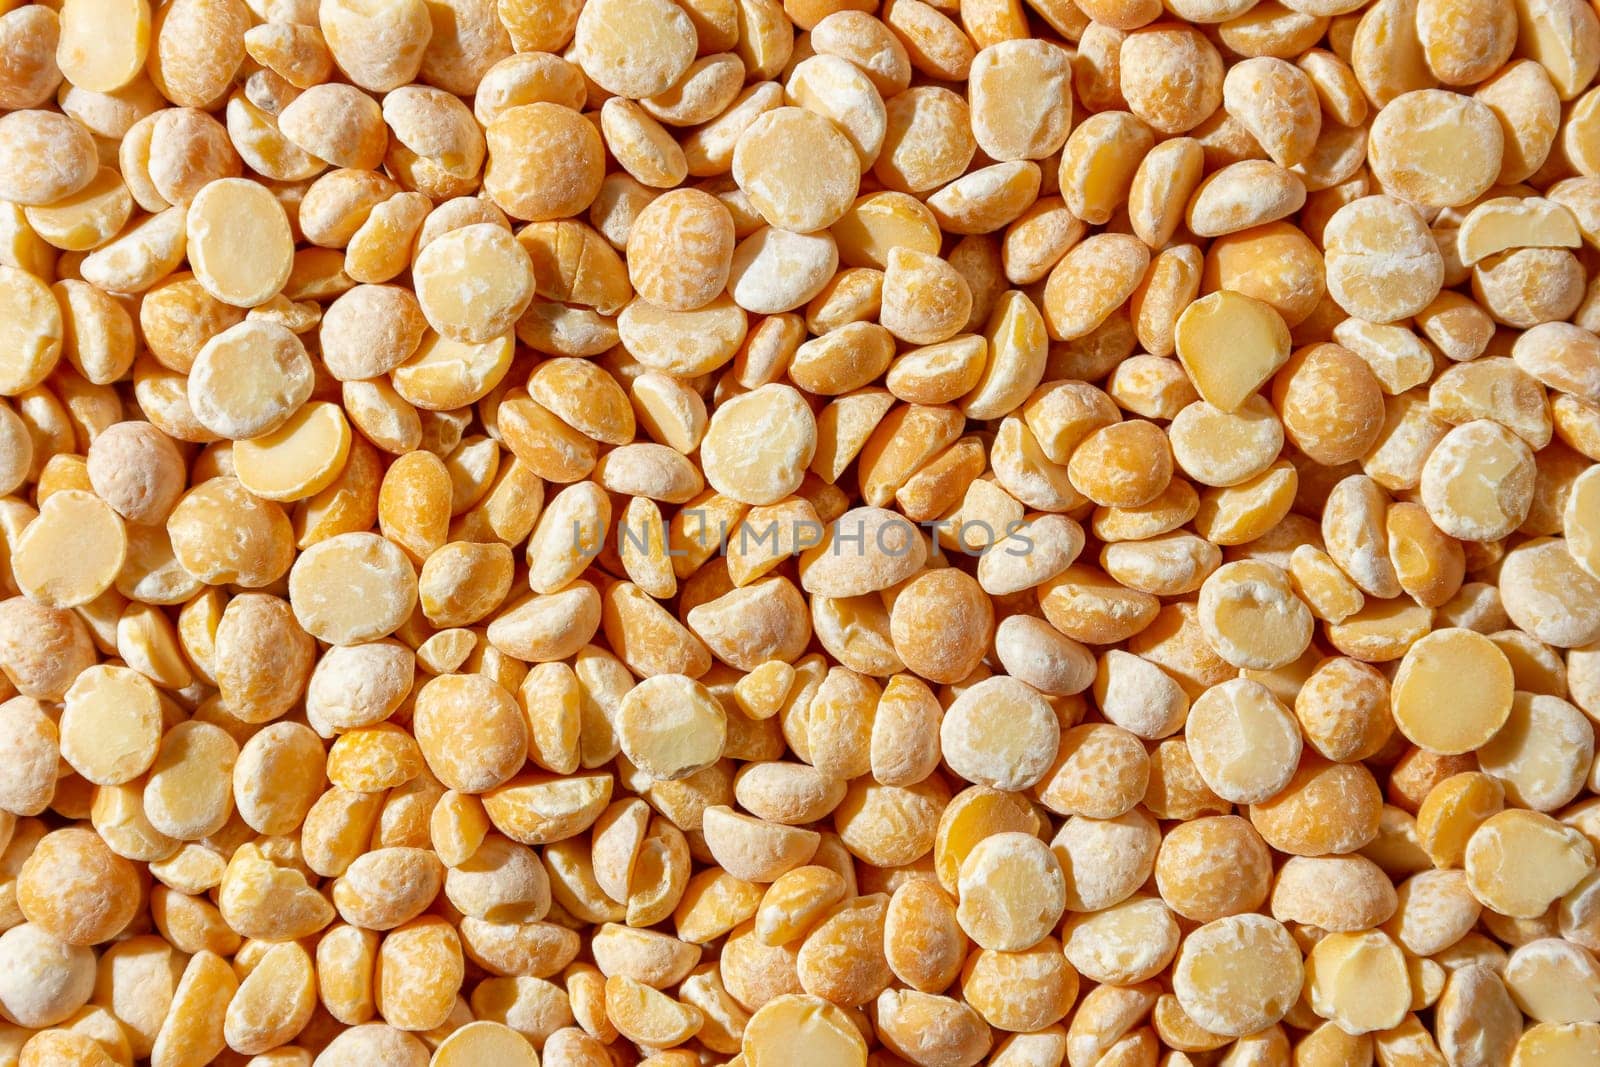 Uncooked Polished Split Peas Background by InfinitumProdux